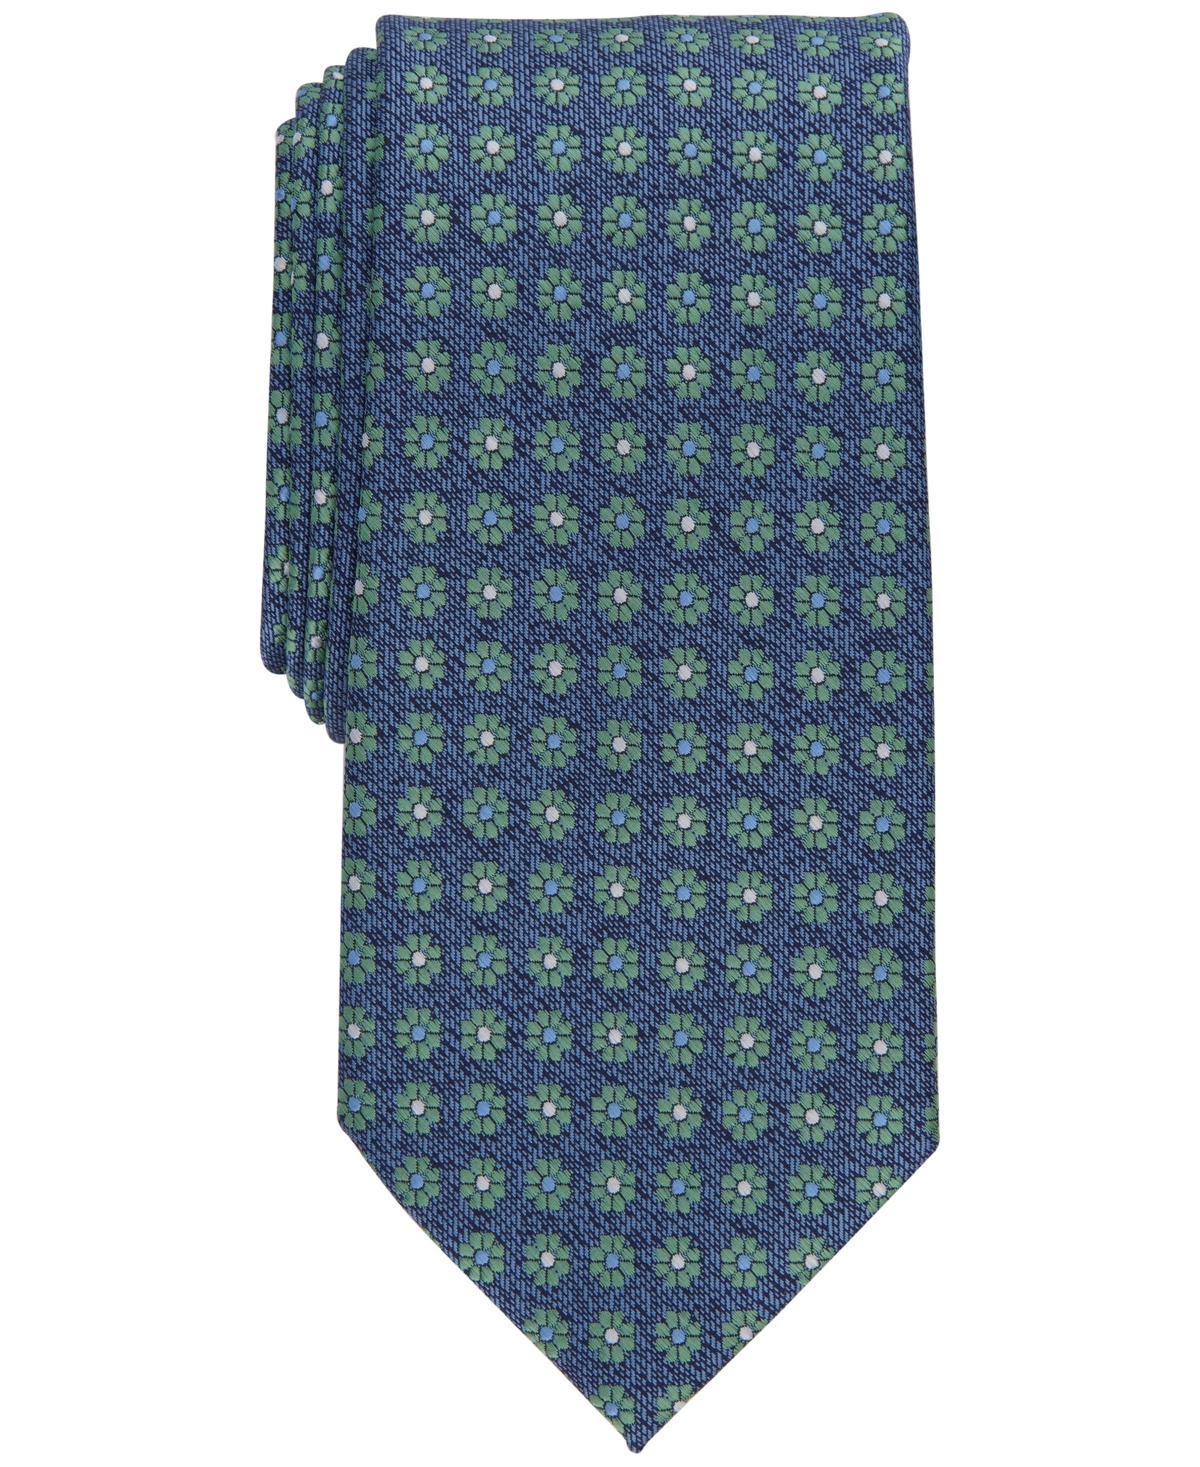 Men's Myrtle Medallion Tie, Created for Macy's - Green